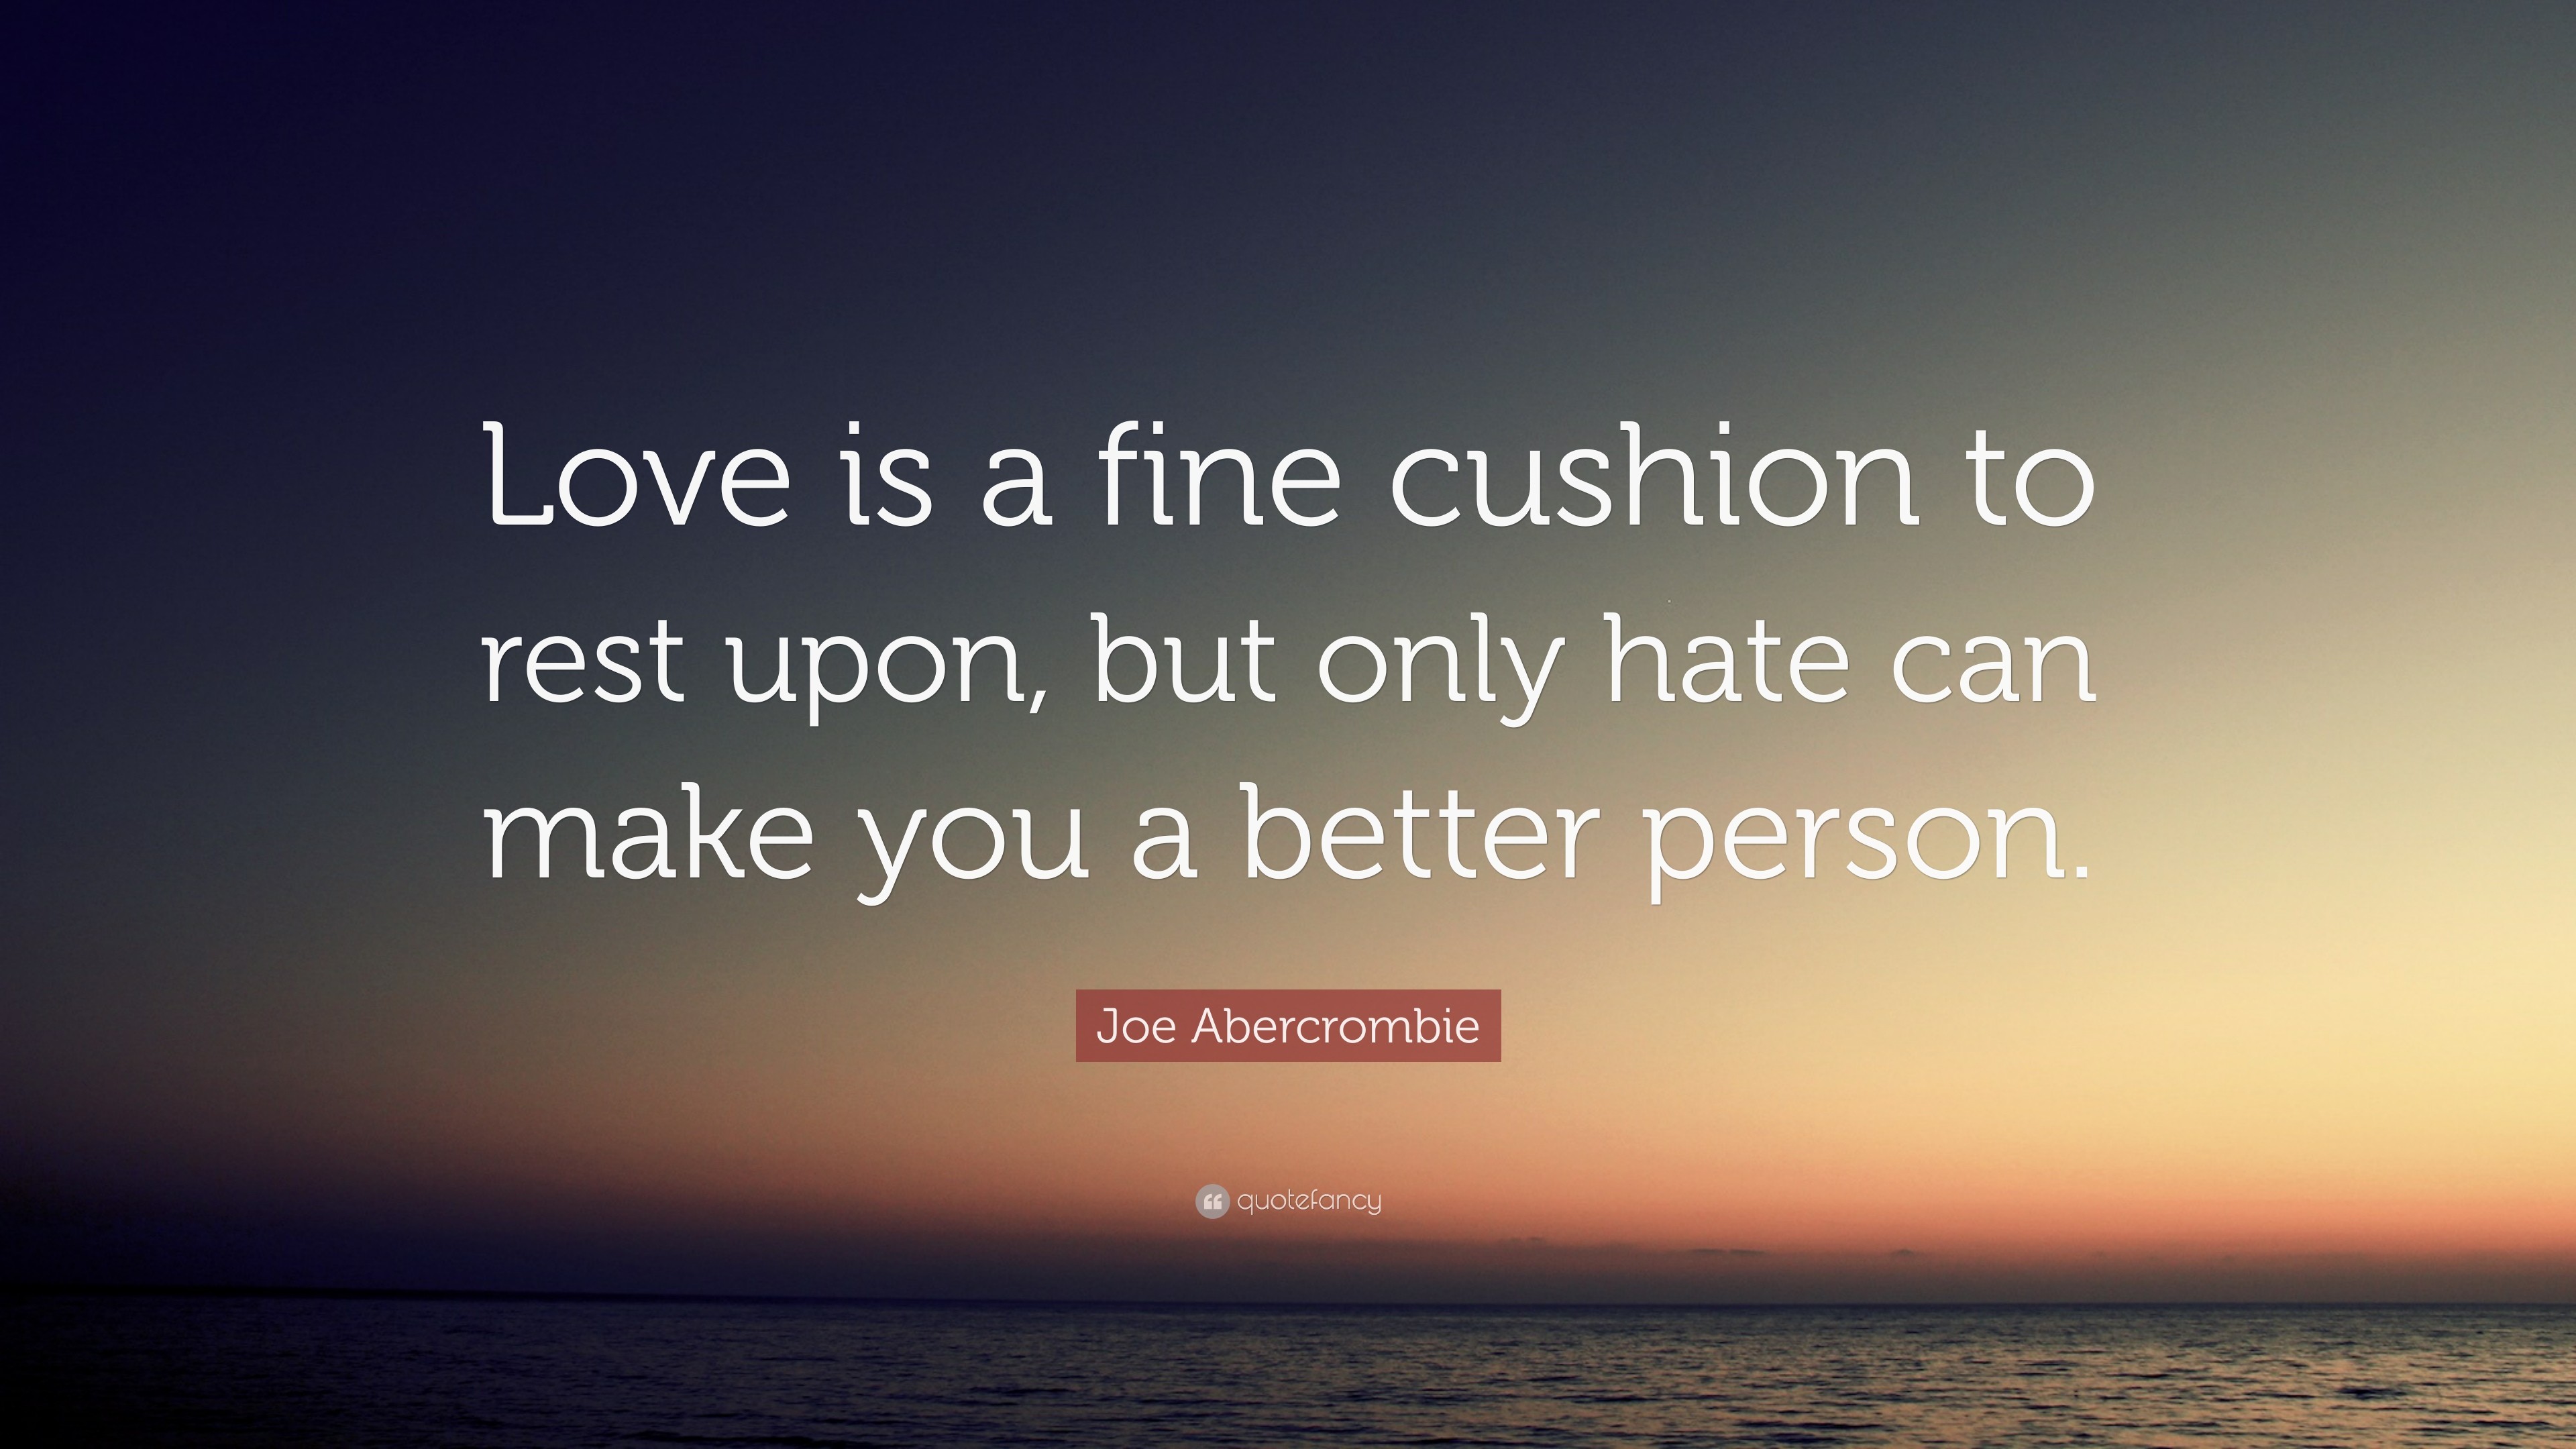 3840x2160 Joe Abercrombie Quote: “Love is a fine cushion to rest upon, but only